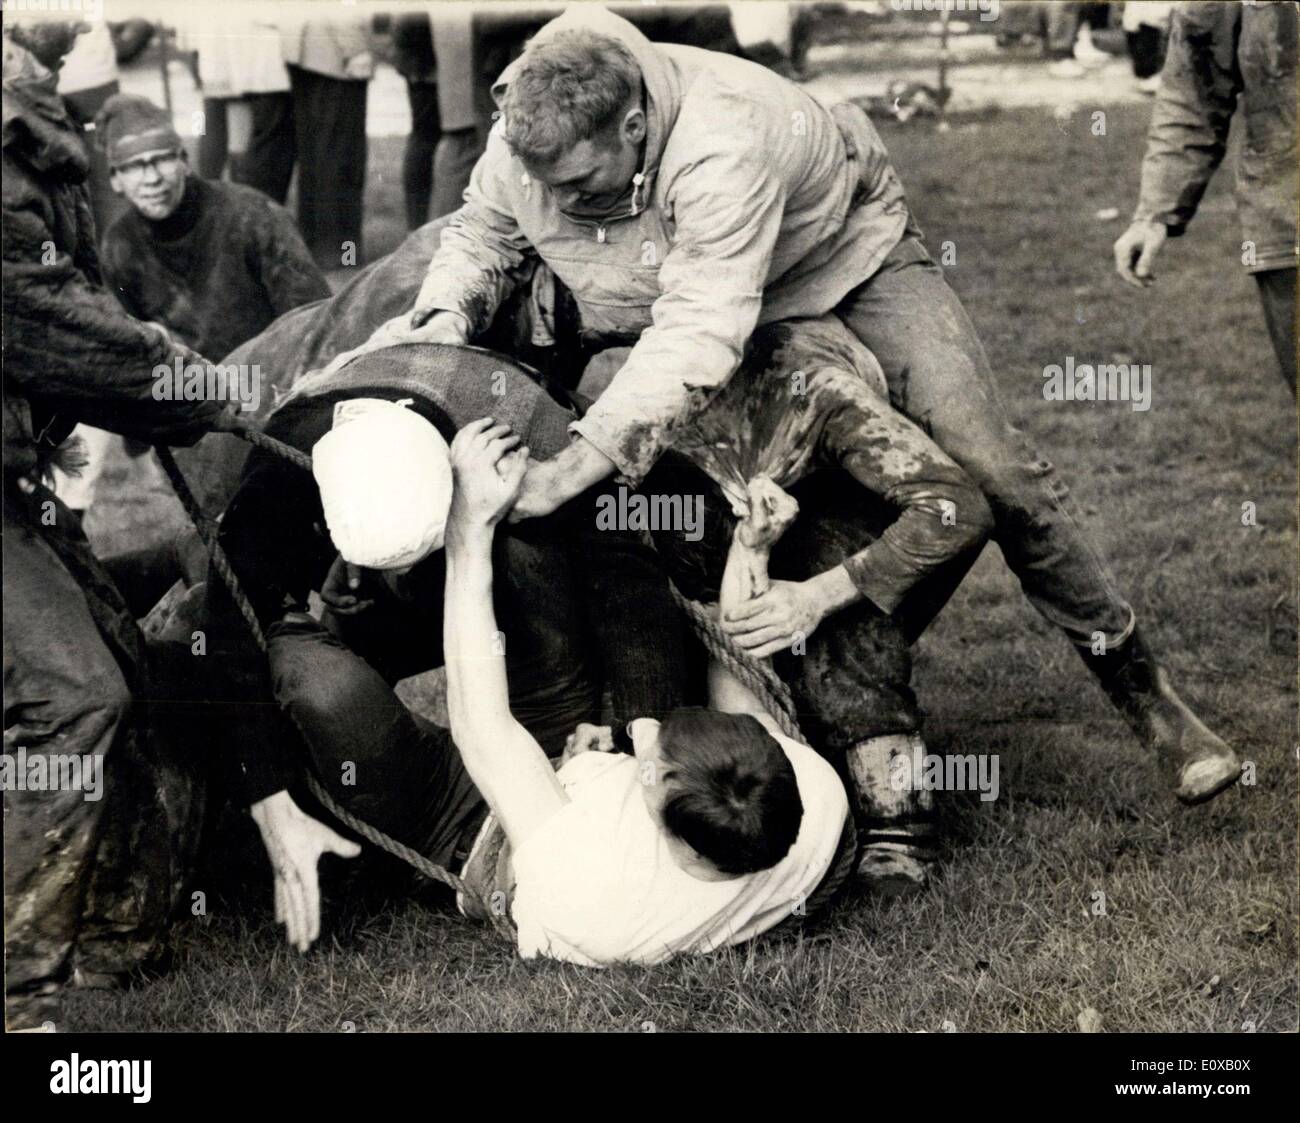 Mar. 03, 1966 - The Hospital Cup Final between Guy's and St. Thomas's took place this afternoon at Richmond Athletic Ground. Photo Shows: Horseplay among students during the pitched 'battle' which was held before the match today. Stock Photo